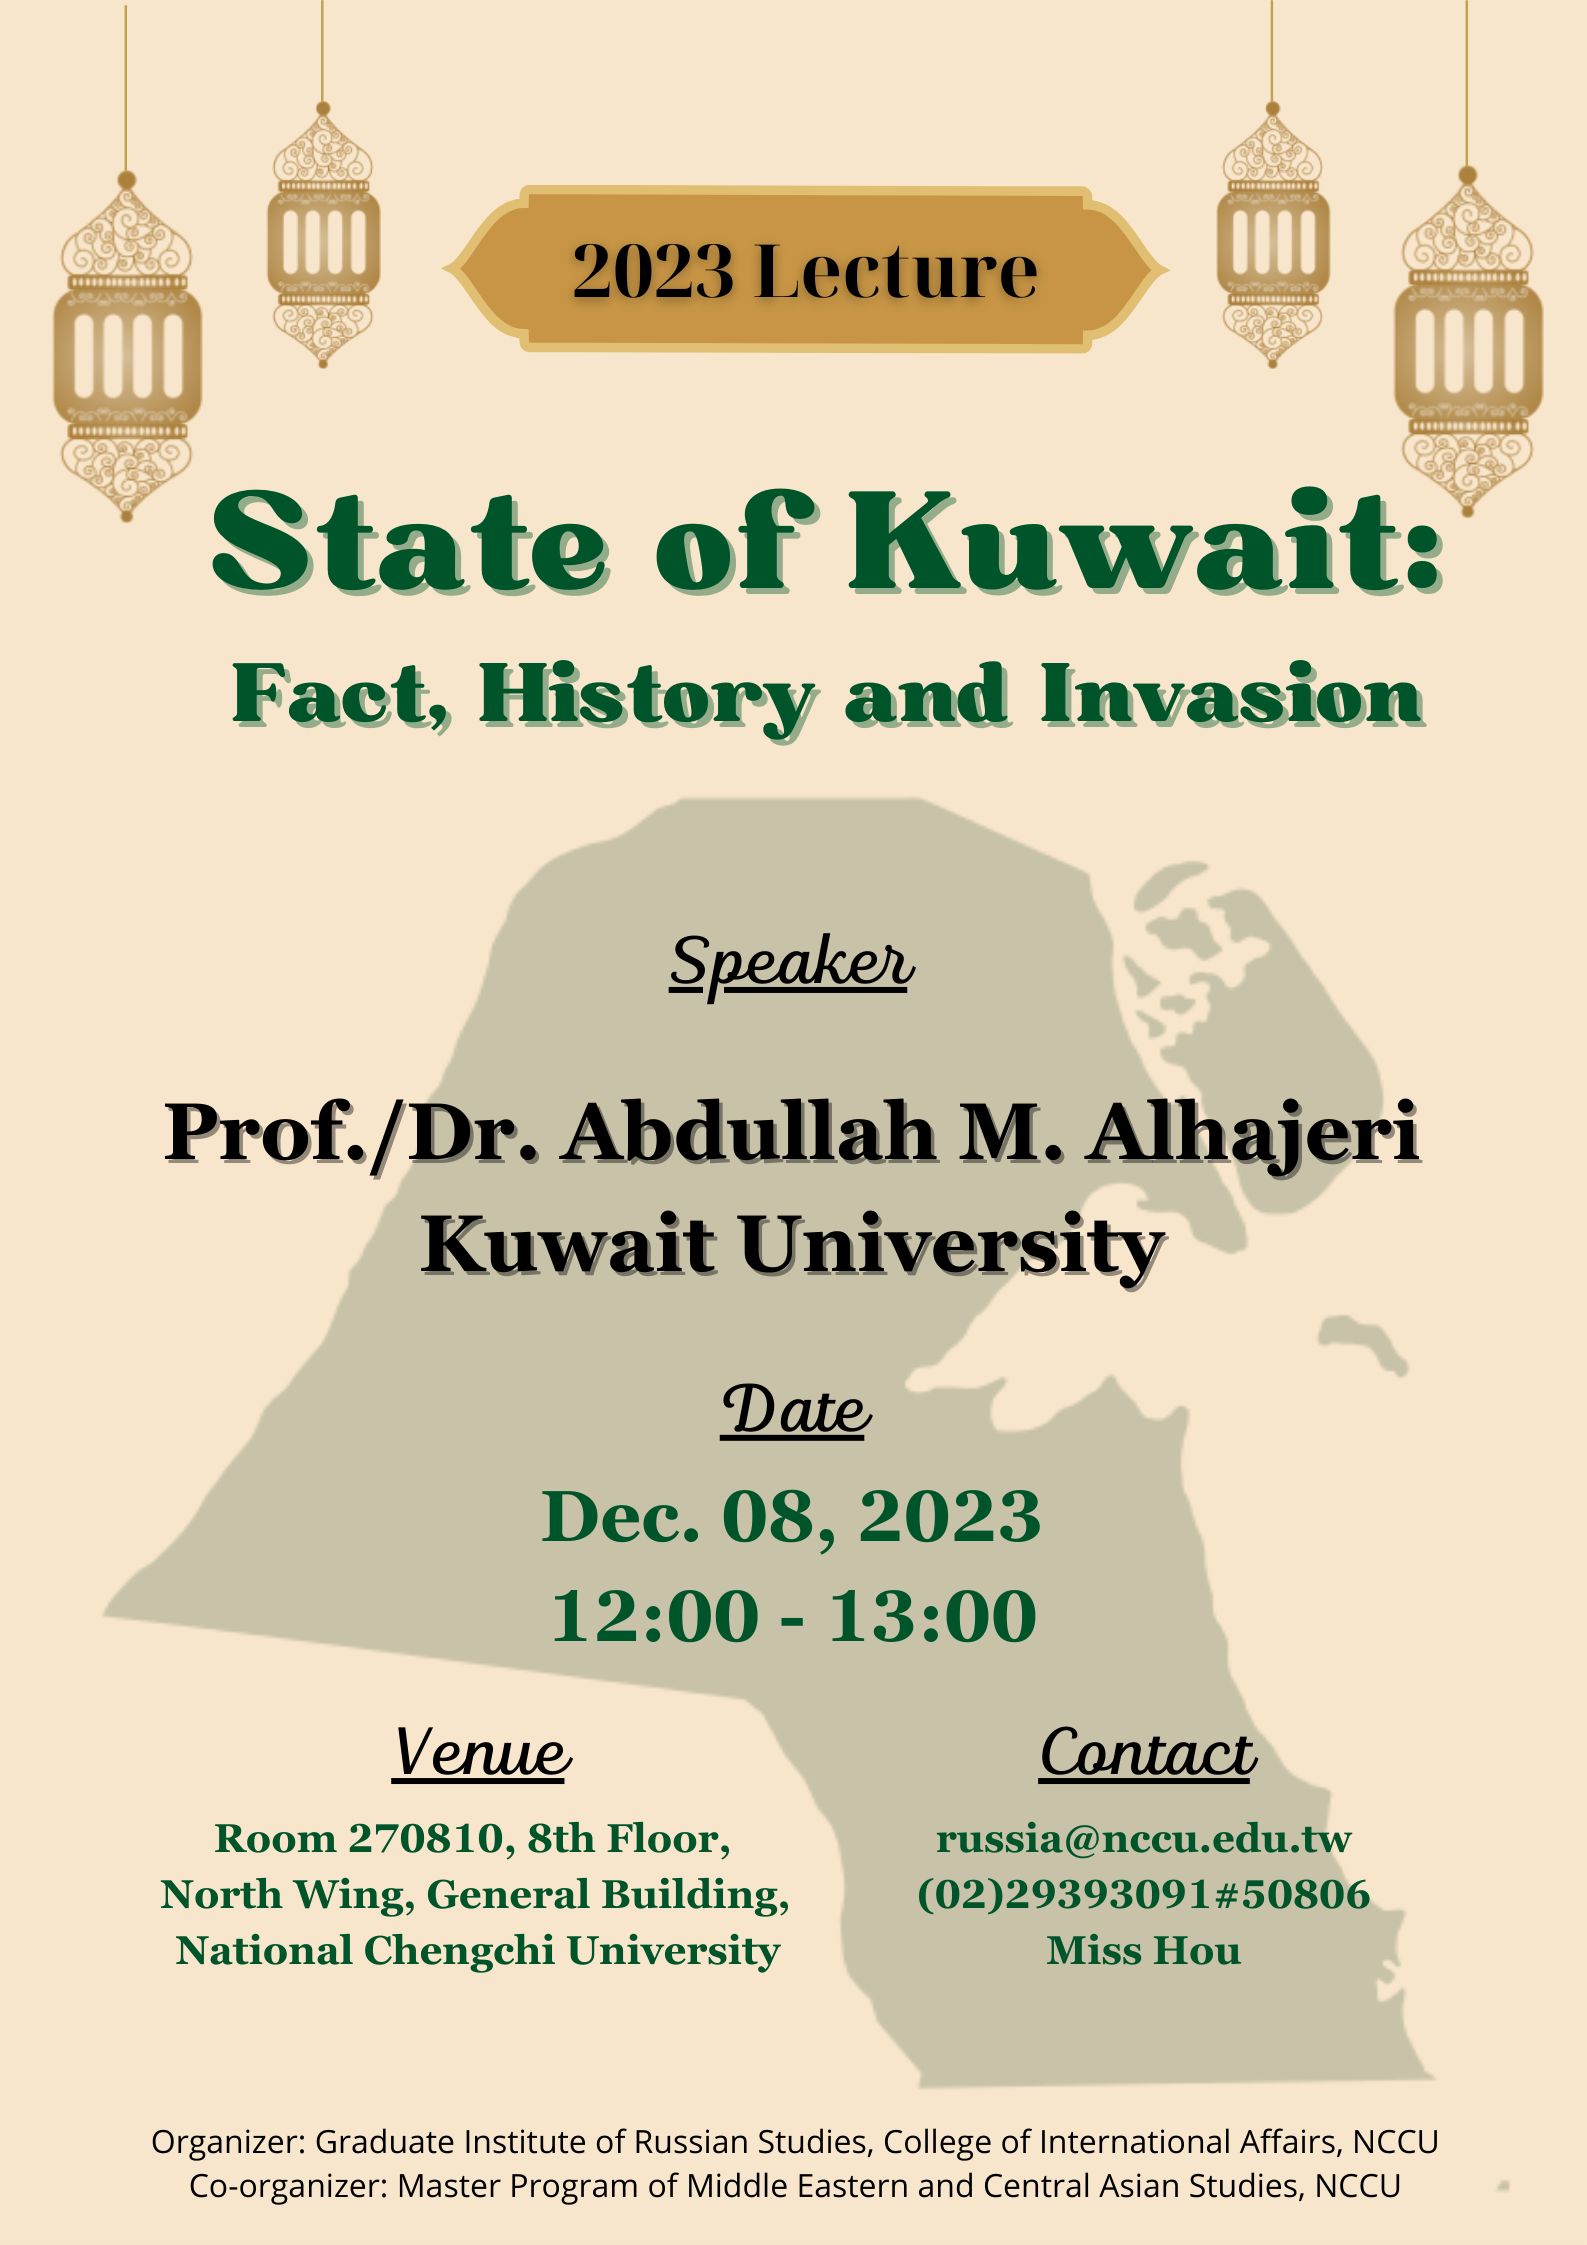 State of Kuwait: Fact, History and Invasion